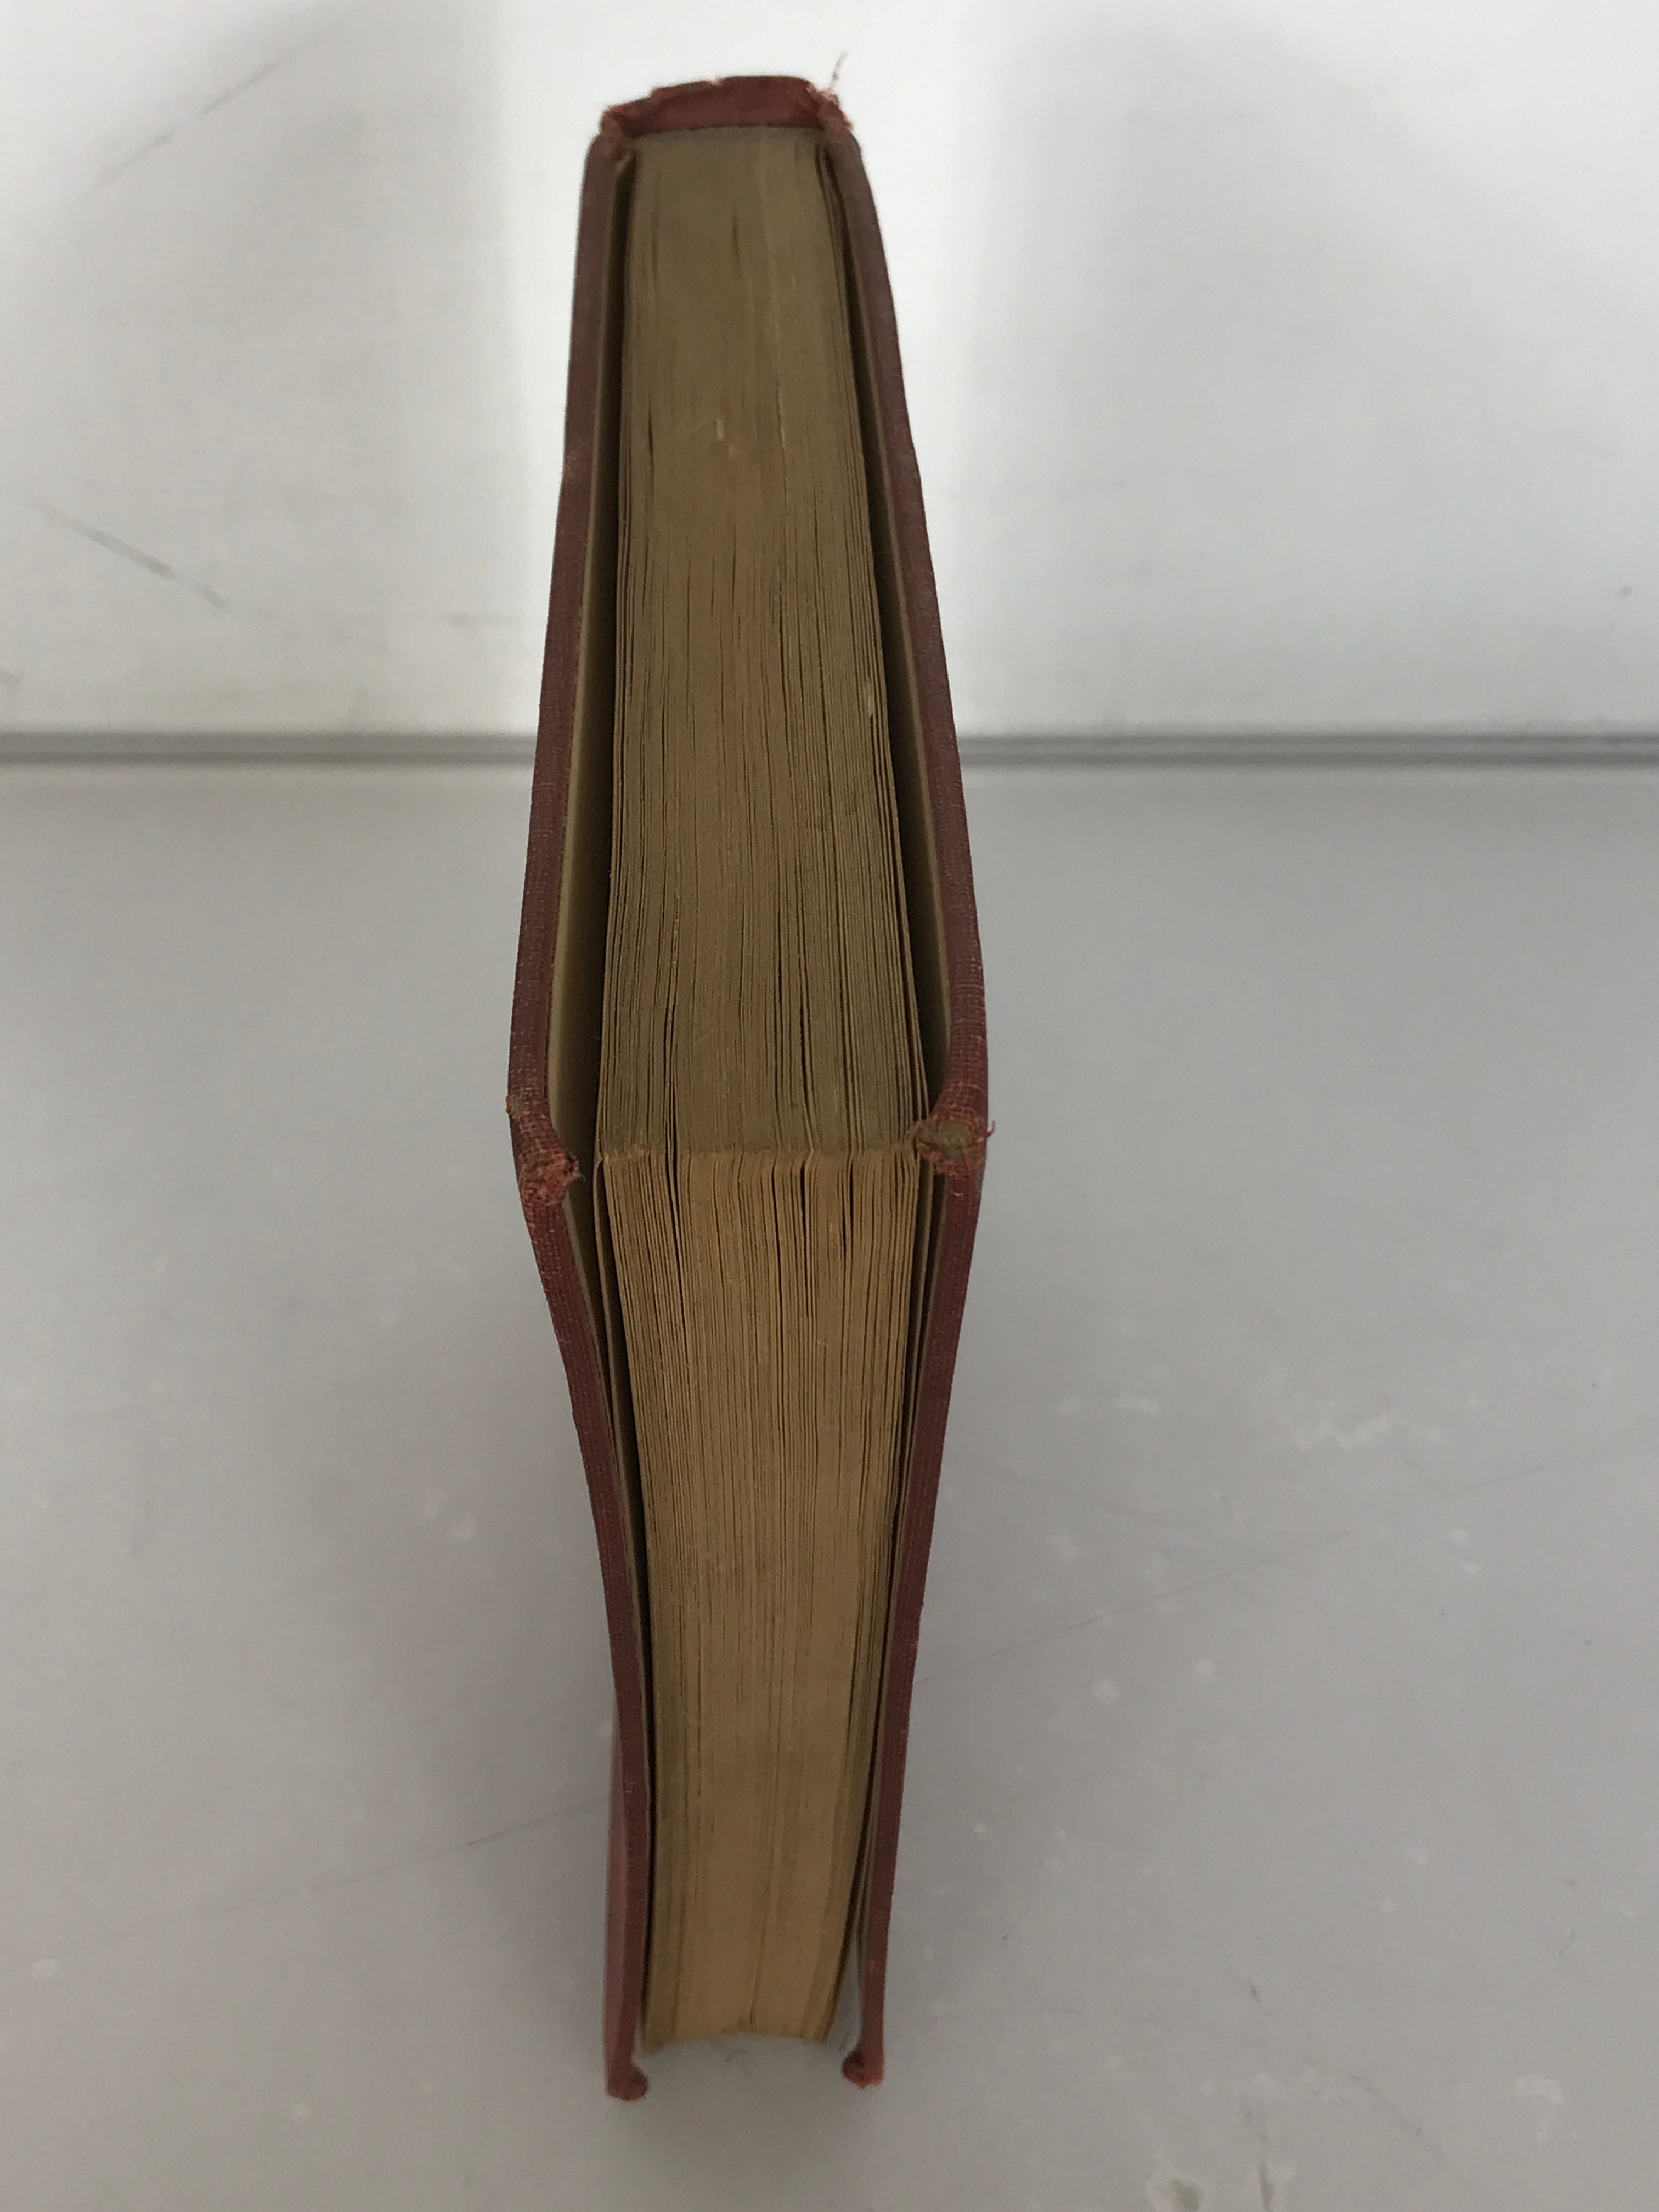 Rare First Edition Bechamp or Pasteur? by E. Douglas Hume 1923 HC